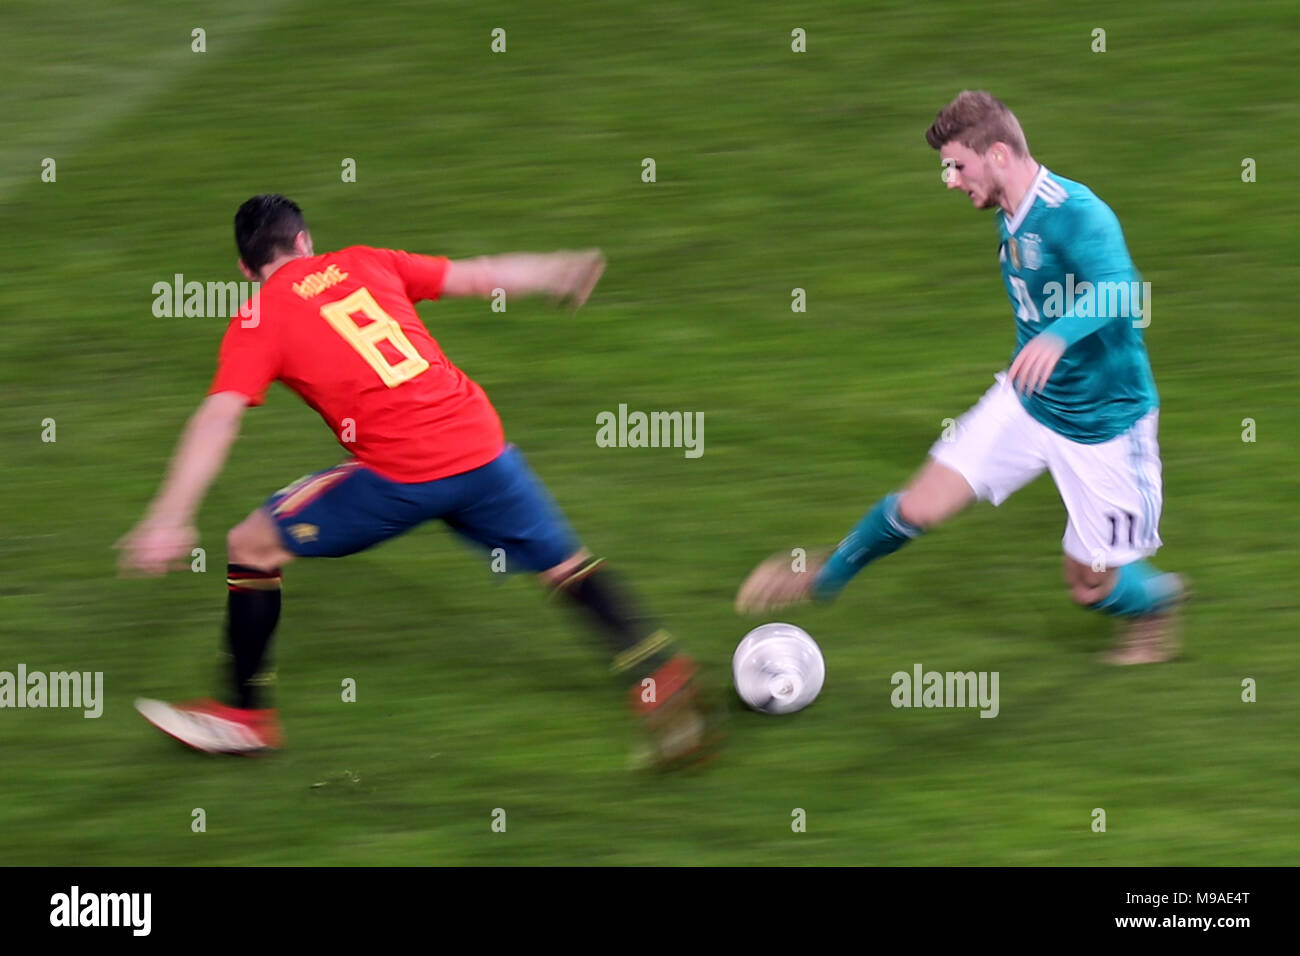 Soccer: Friendly match, Germany vs Spain, 23 March 2018 in the ESPRIT arena, Duesseldorf, Germany: Germany's Timo Werner (R) and Spain's Koke vying for the ball. Photo: Christian Charisius/dpa Stock Photo